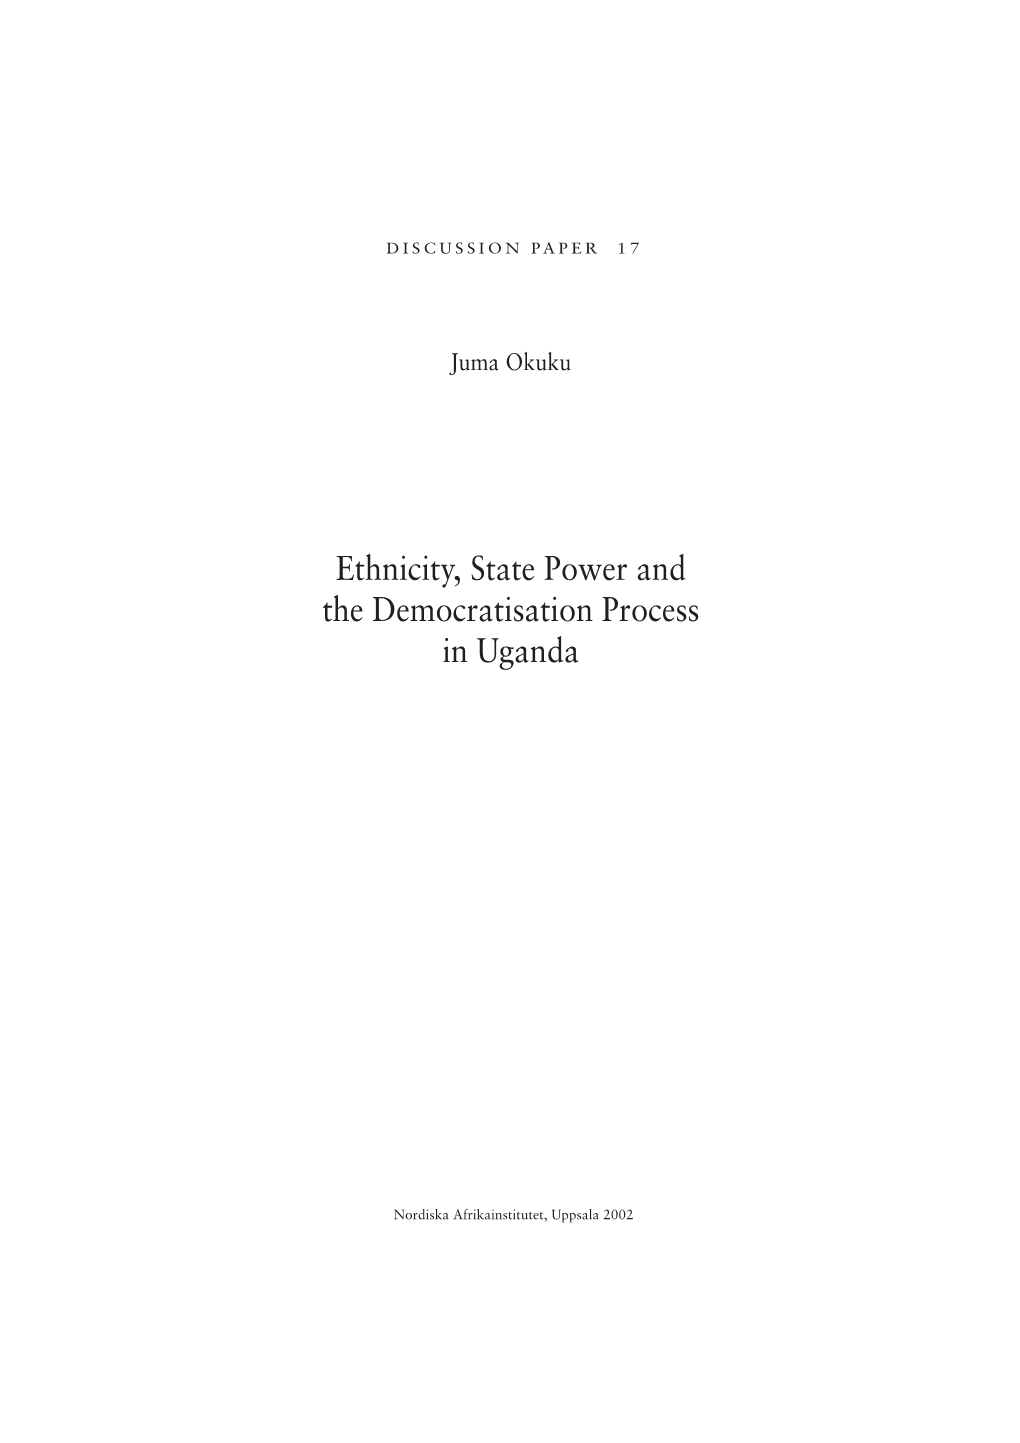 Ethnicity, State Power and the Democratisation Process in Uganda